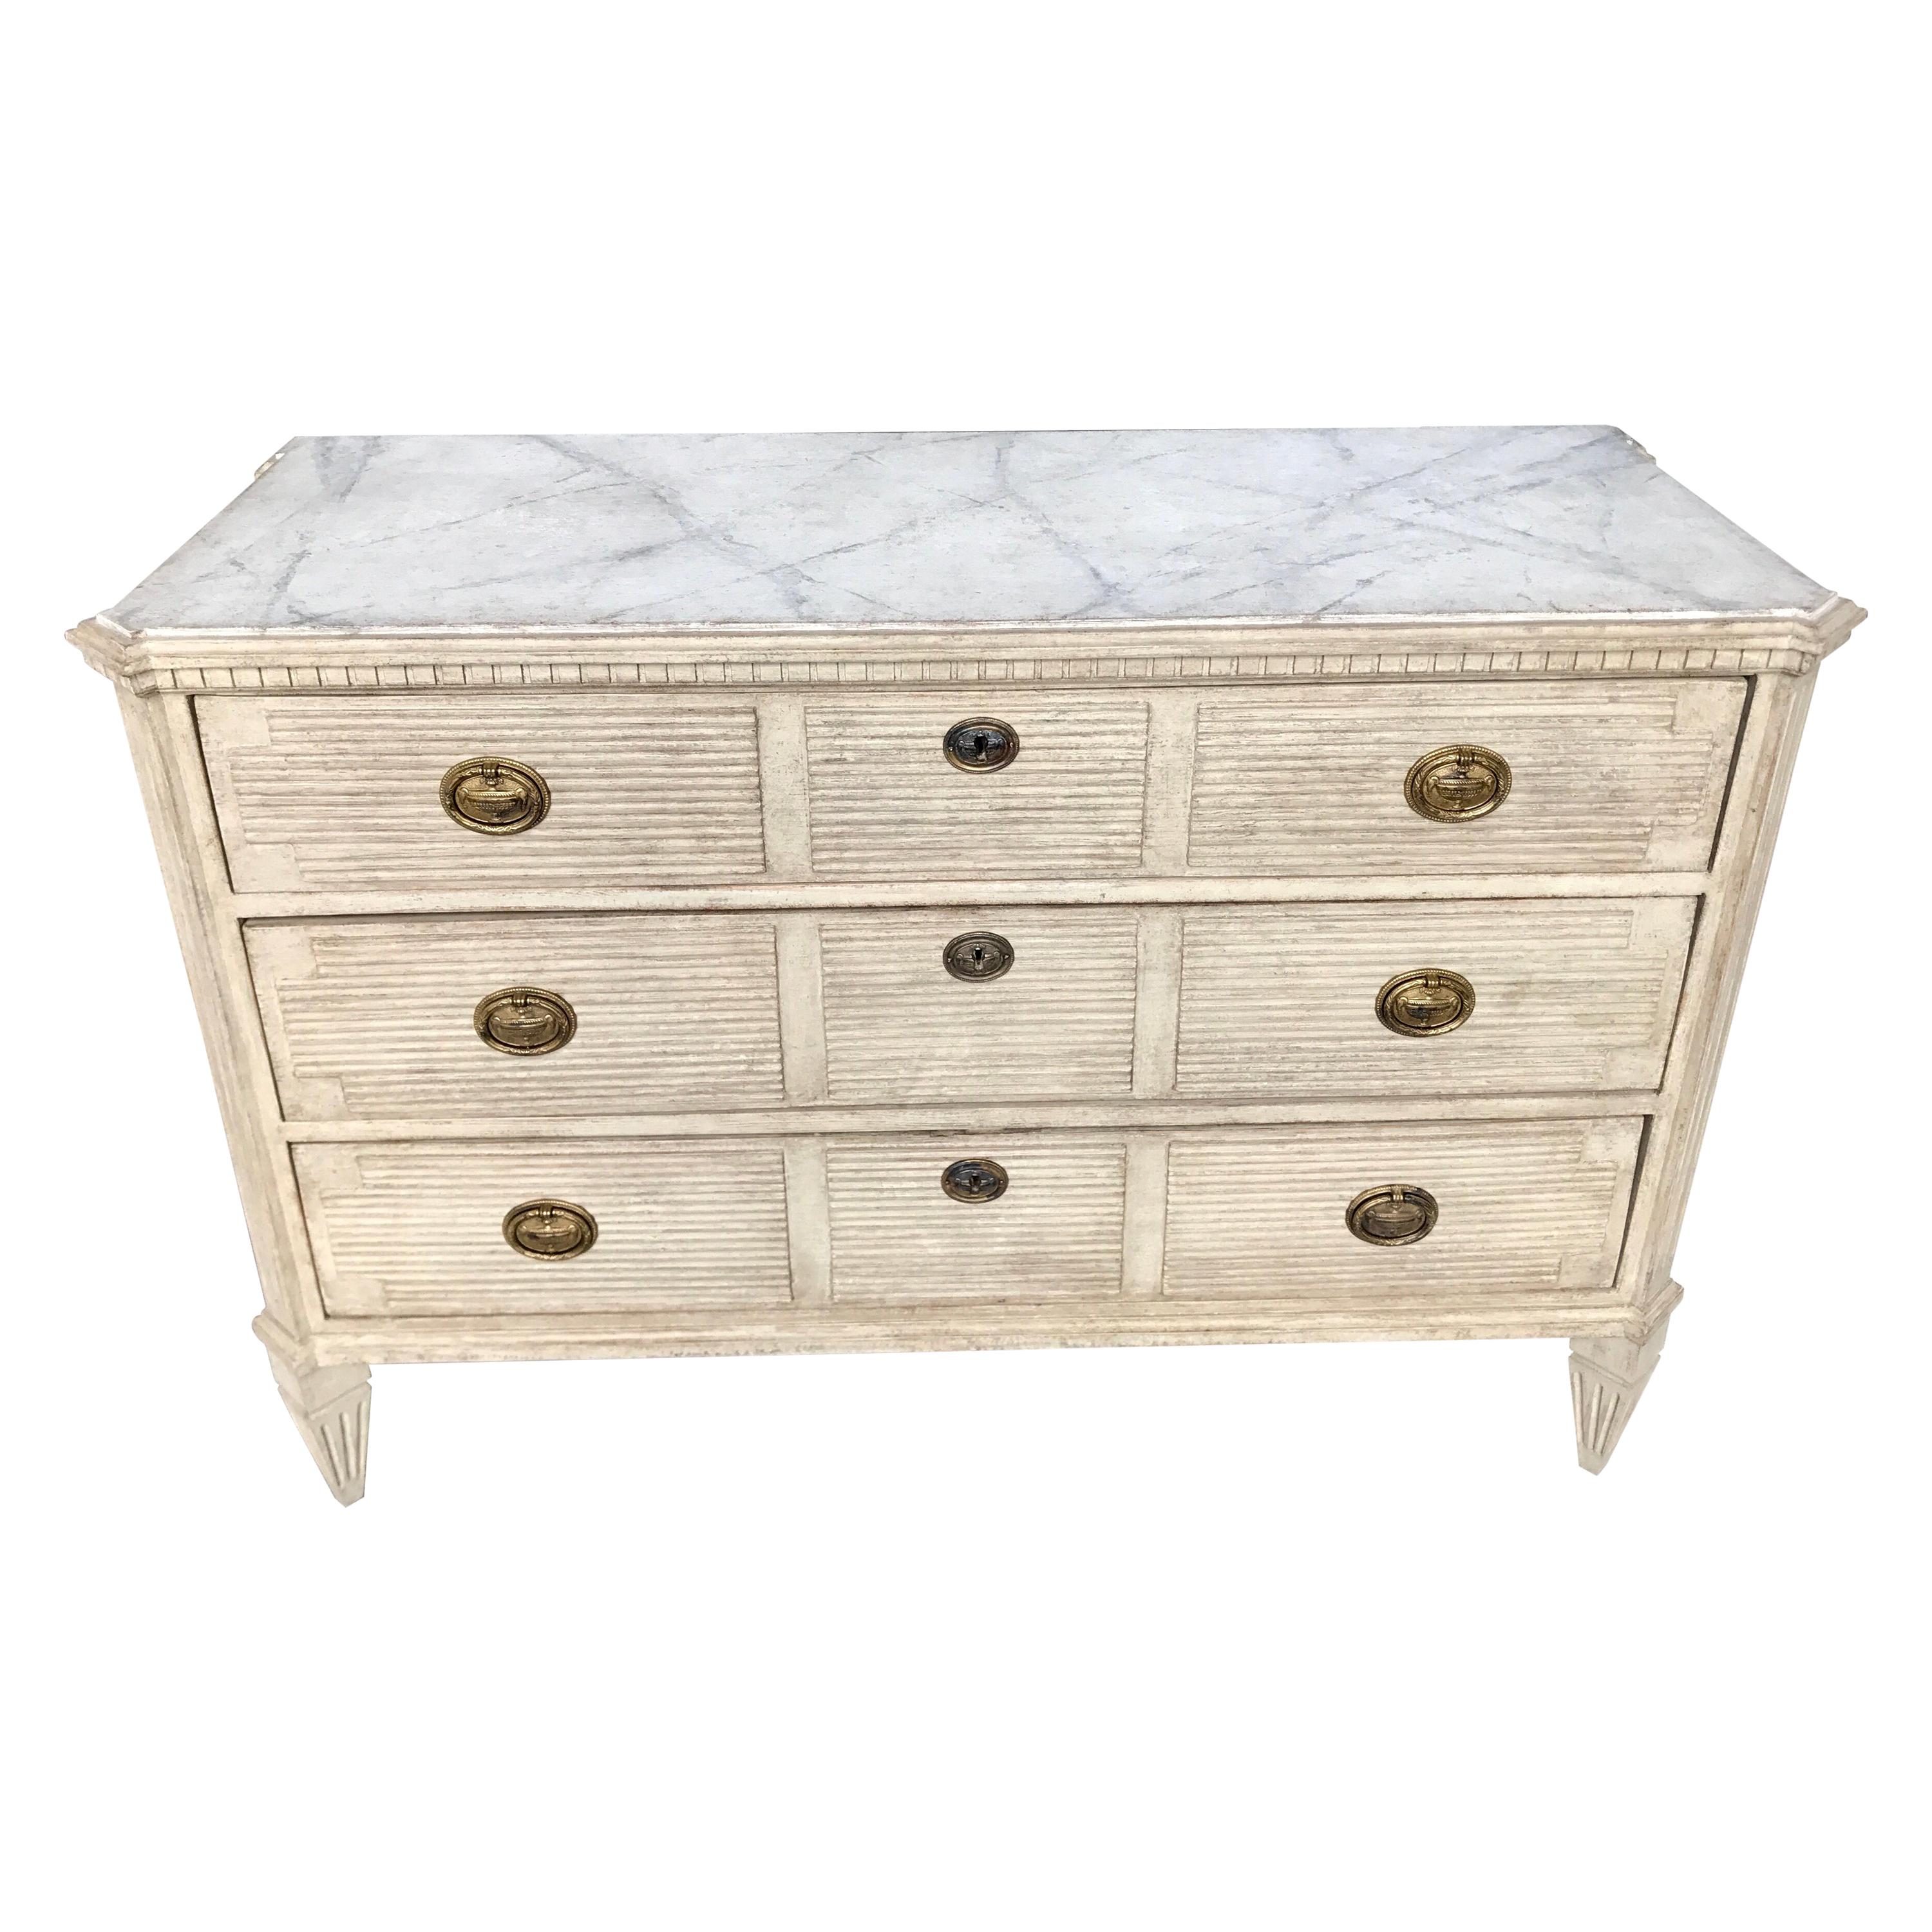 Antique Gustavian Style Chest of Drawers, Mid-19th Century For Sale